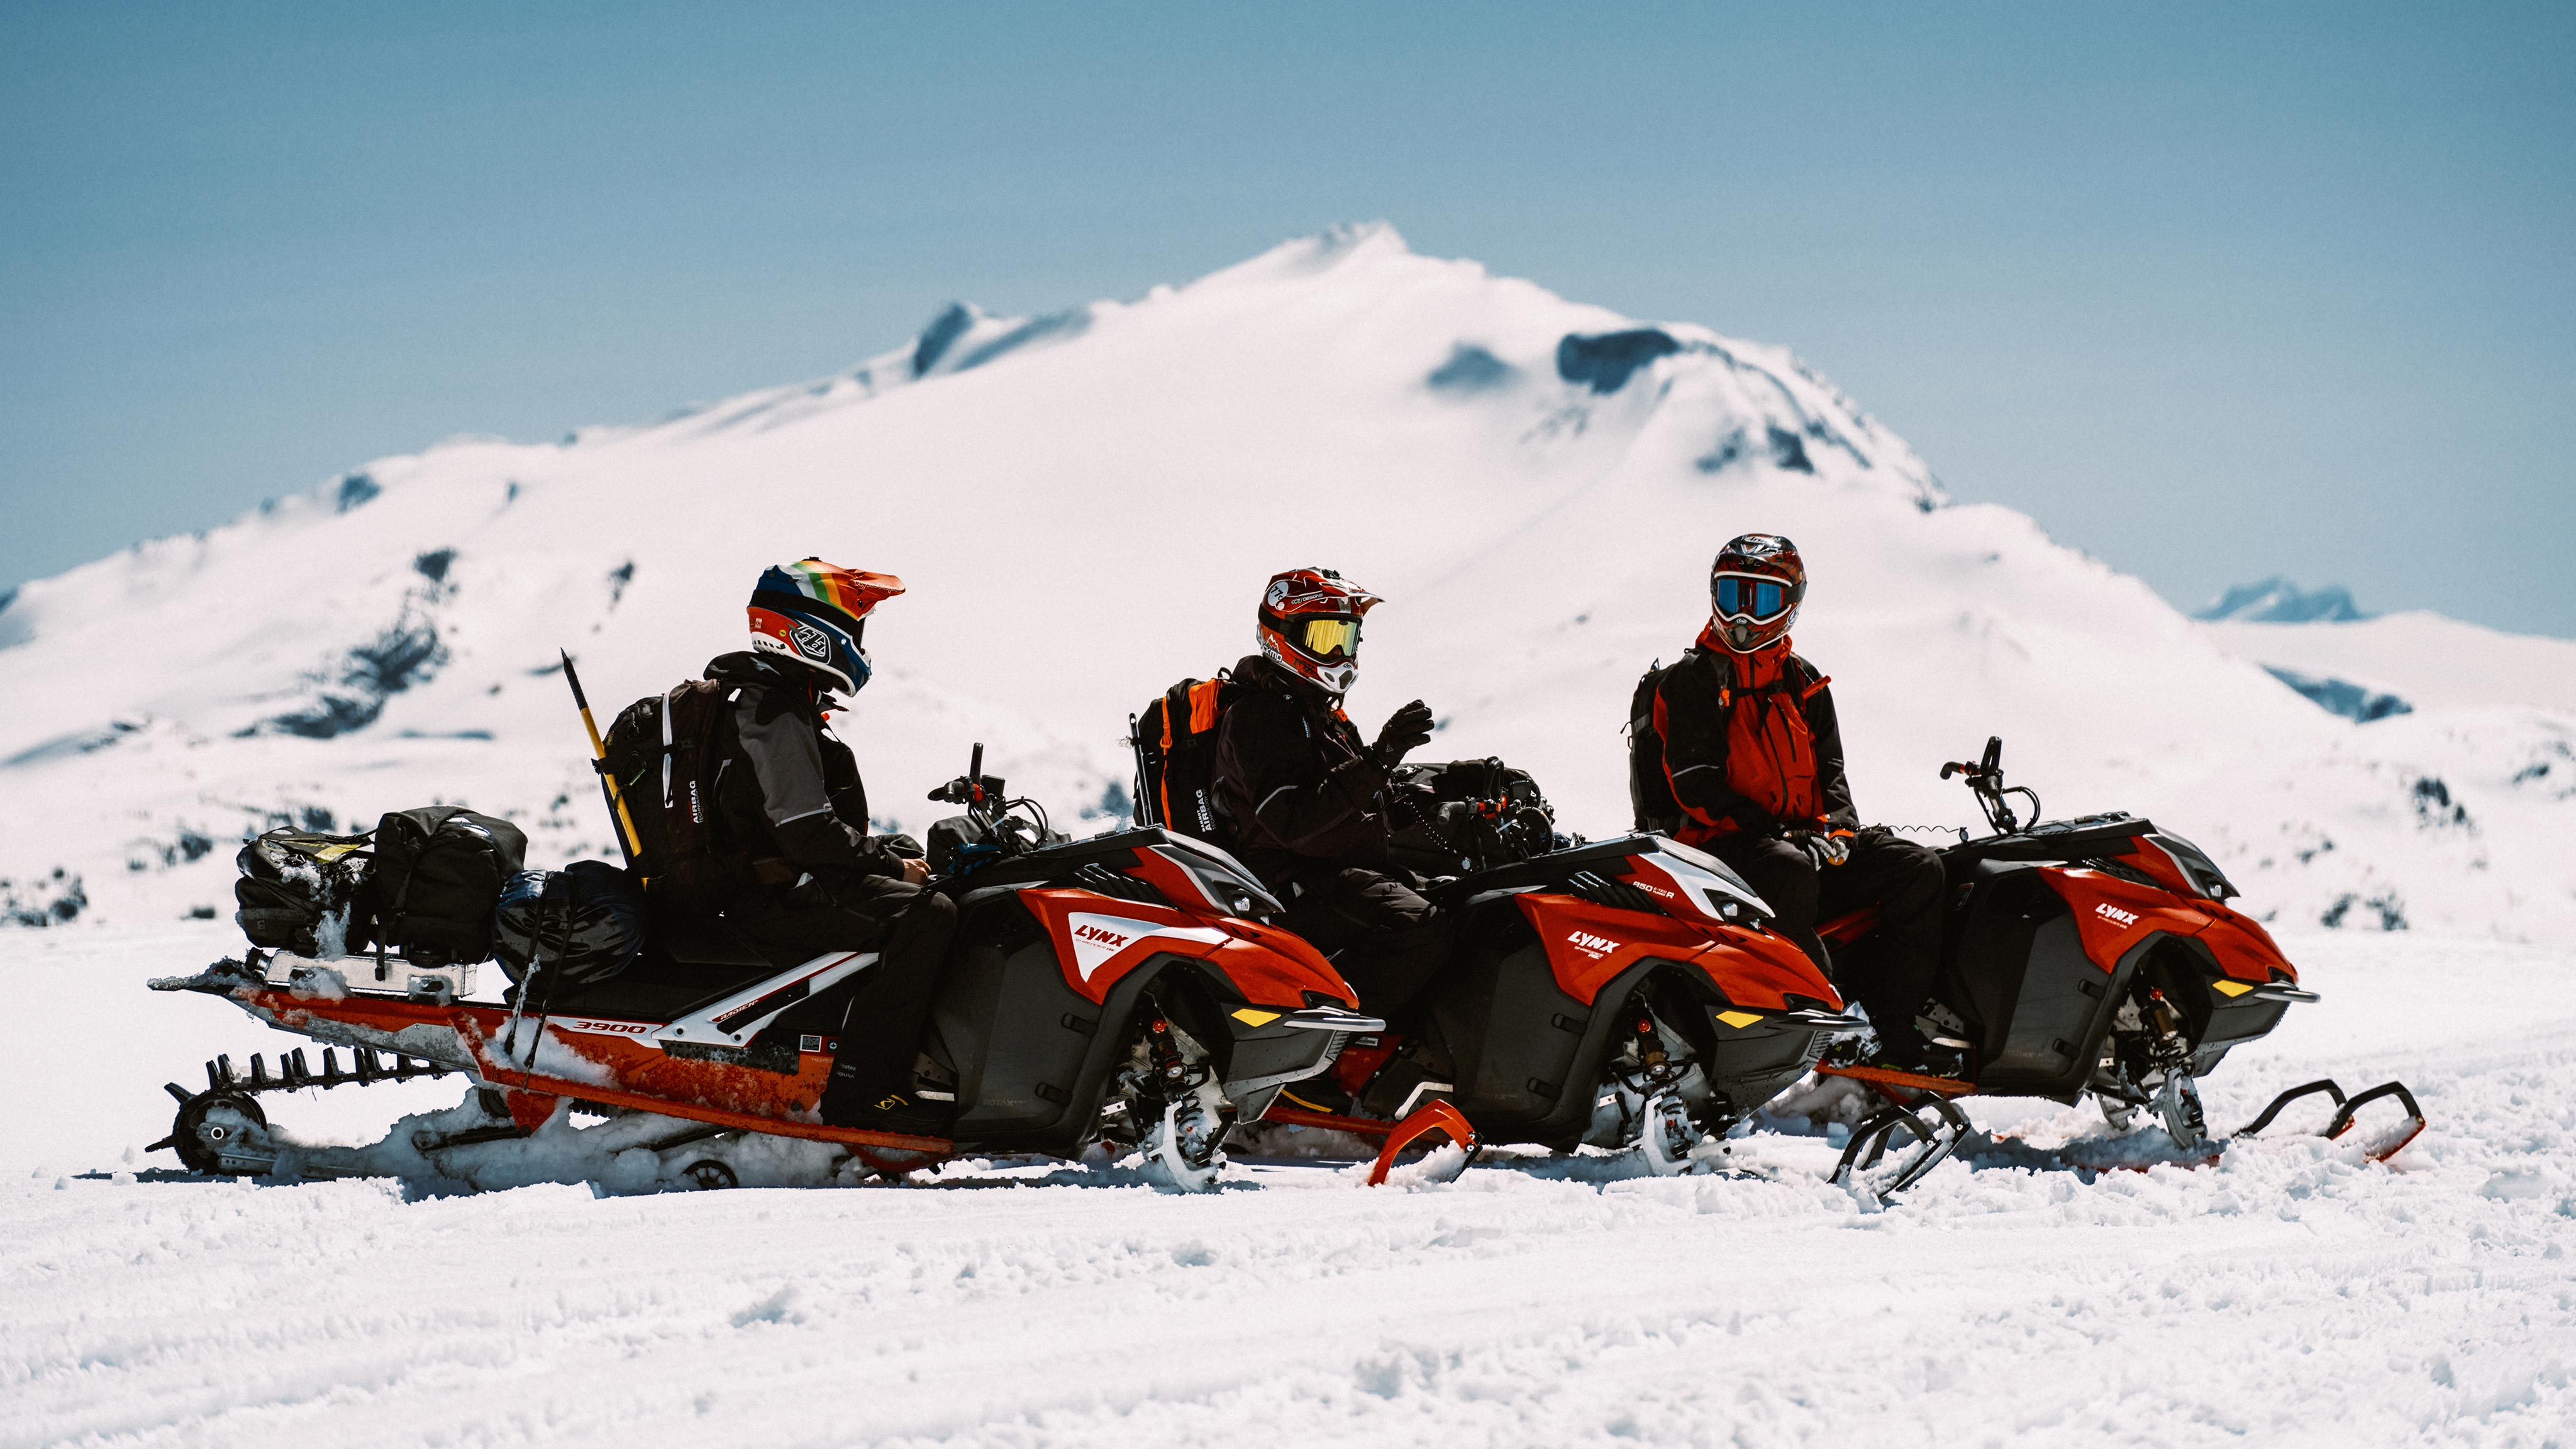 3 Lynx riders sitting on their sleds